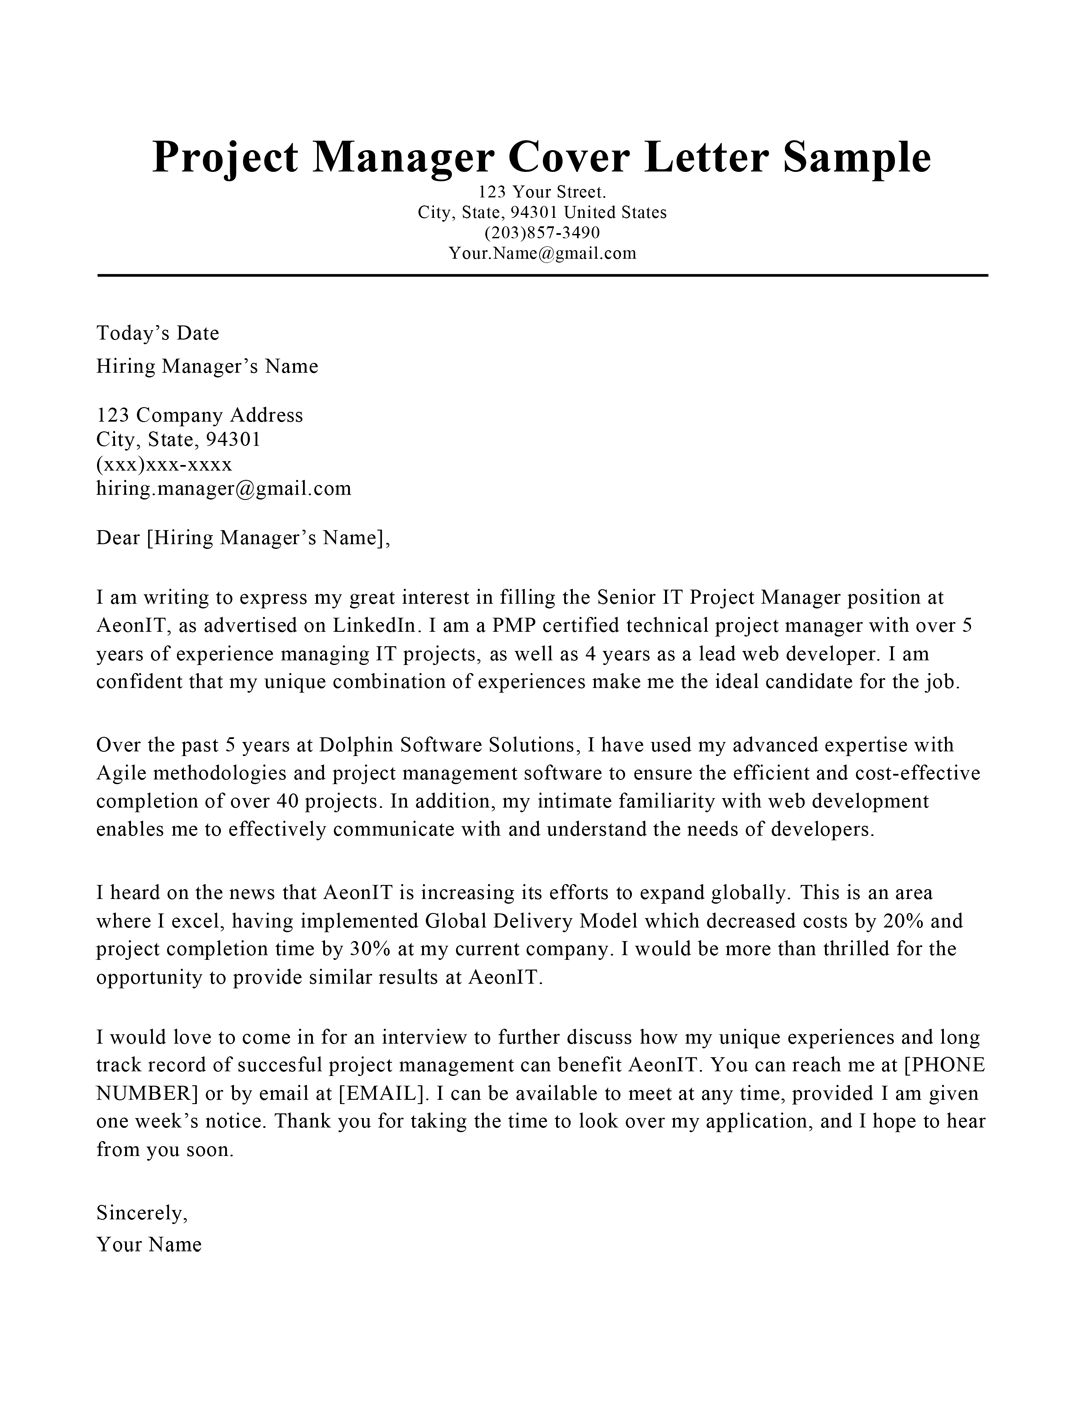 resume cover letter construction manager